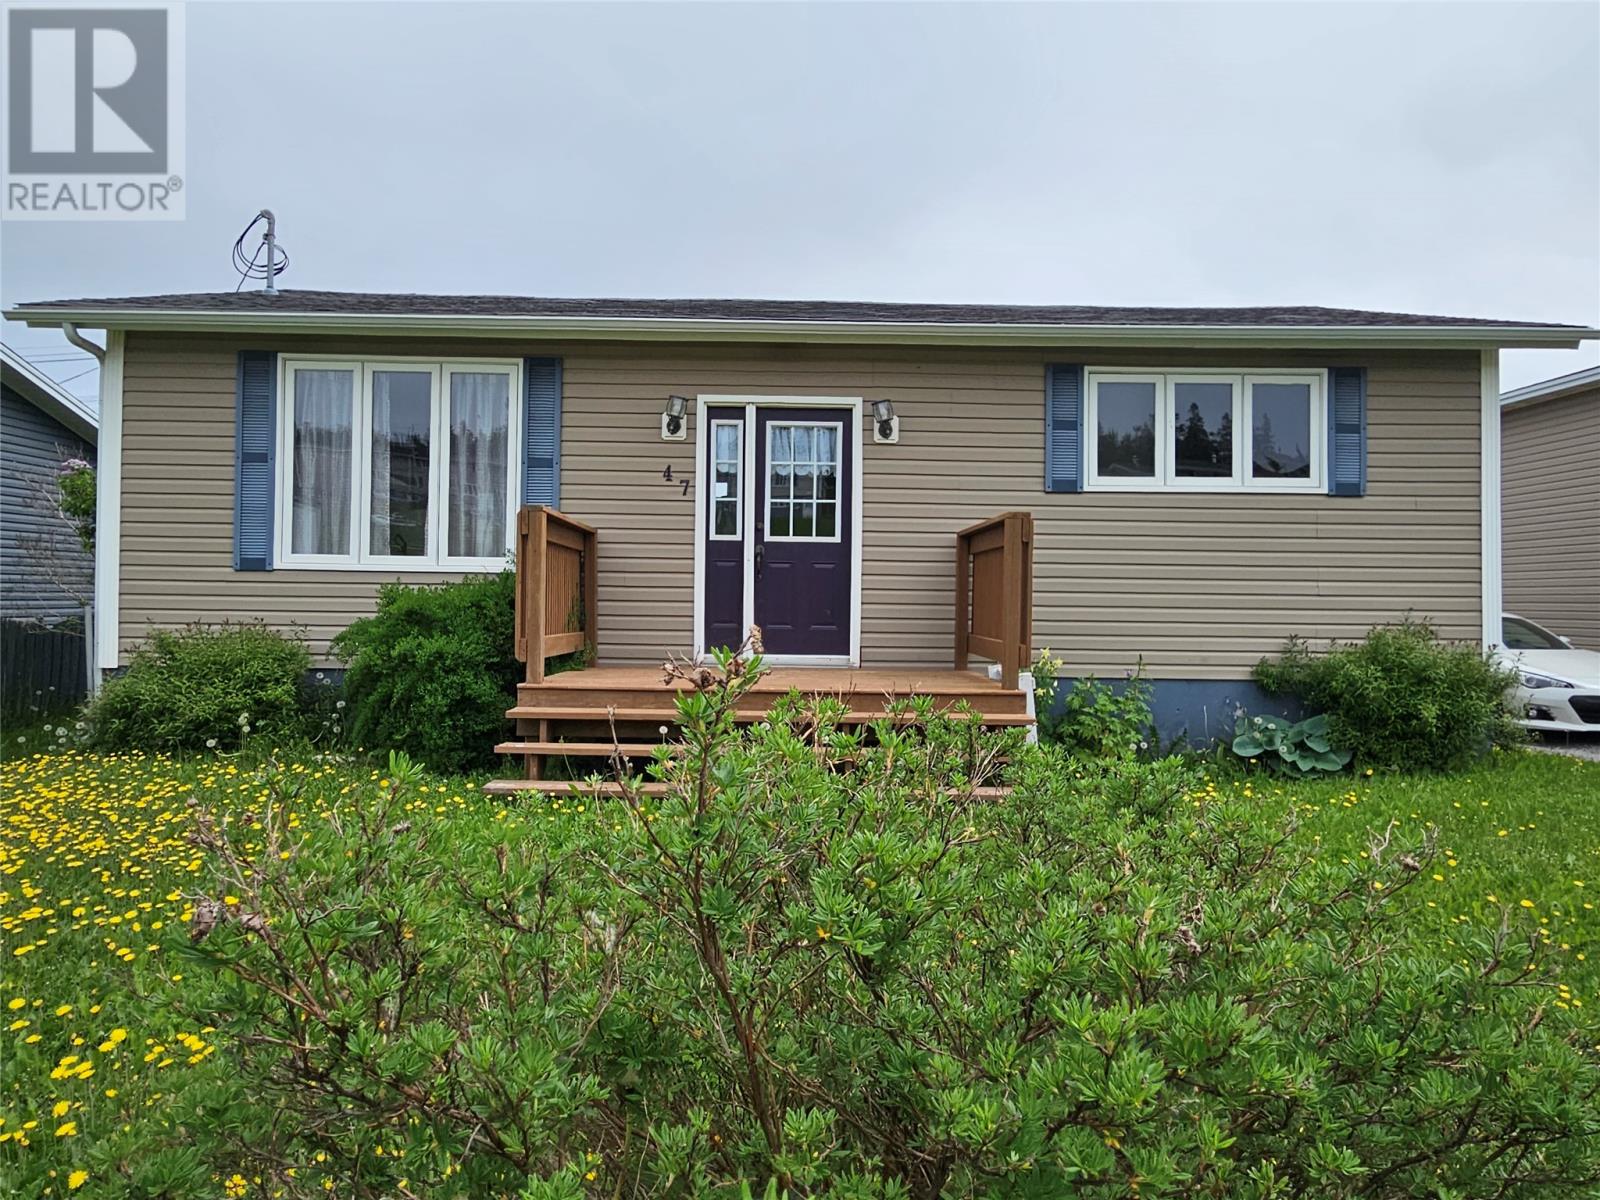 47 Harris Drive, Marystown, A0E2M0, 3 Bedrooms Bedrooms, ,1 BathroomBathrooms,Single Family,For sale,Harris,1252896